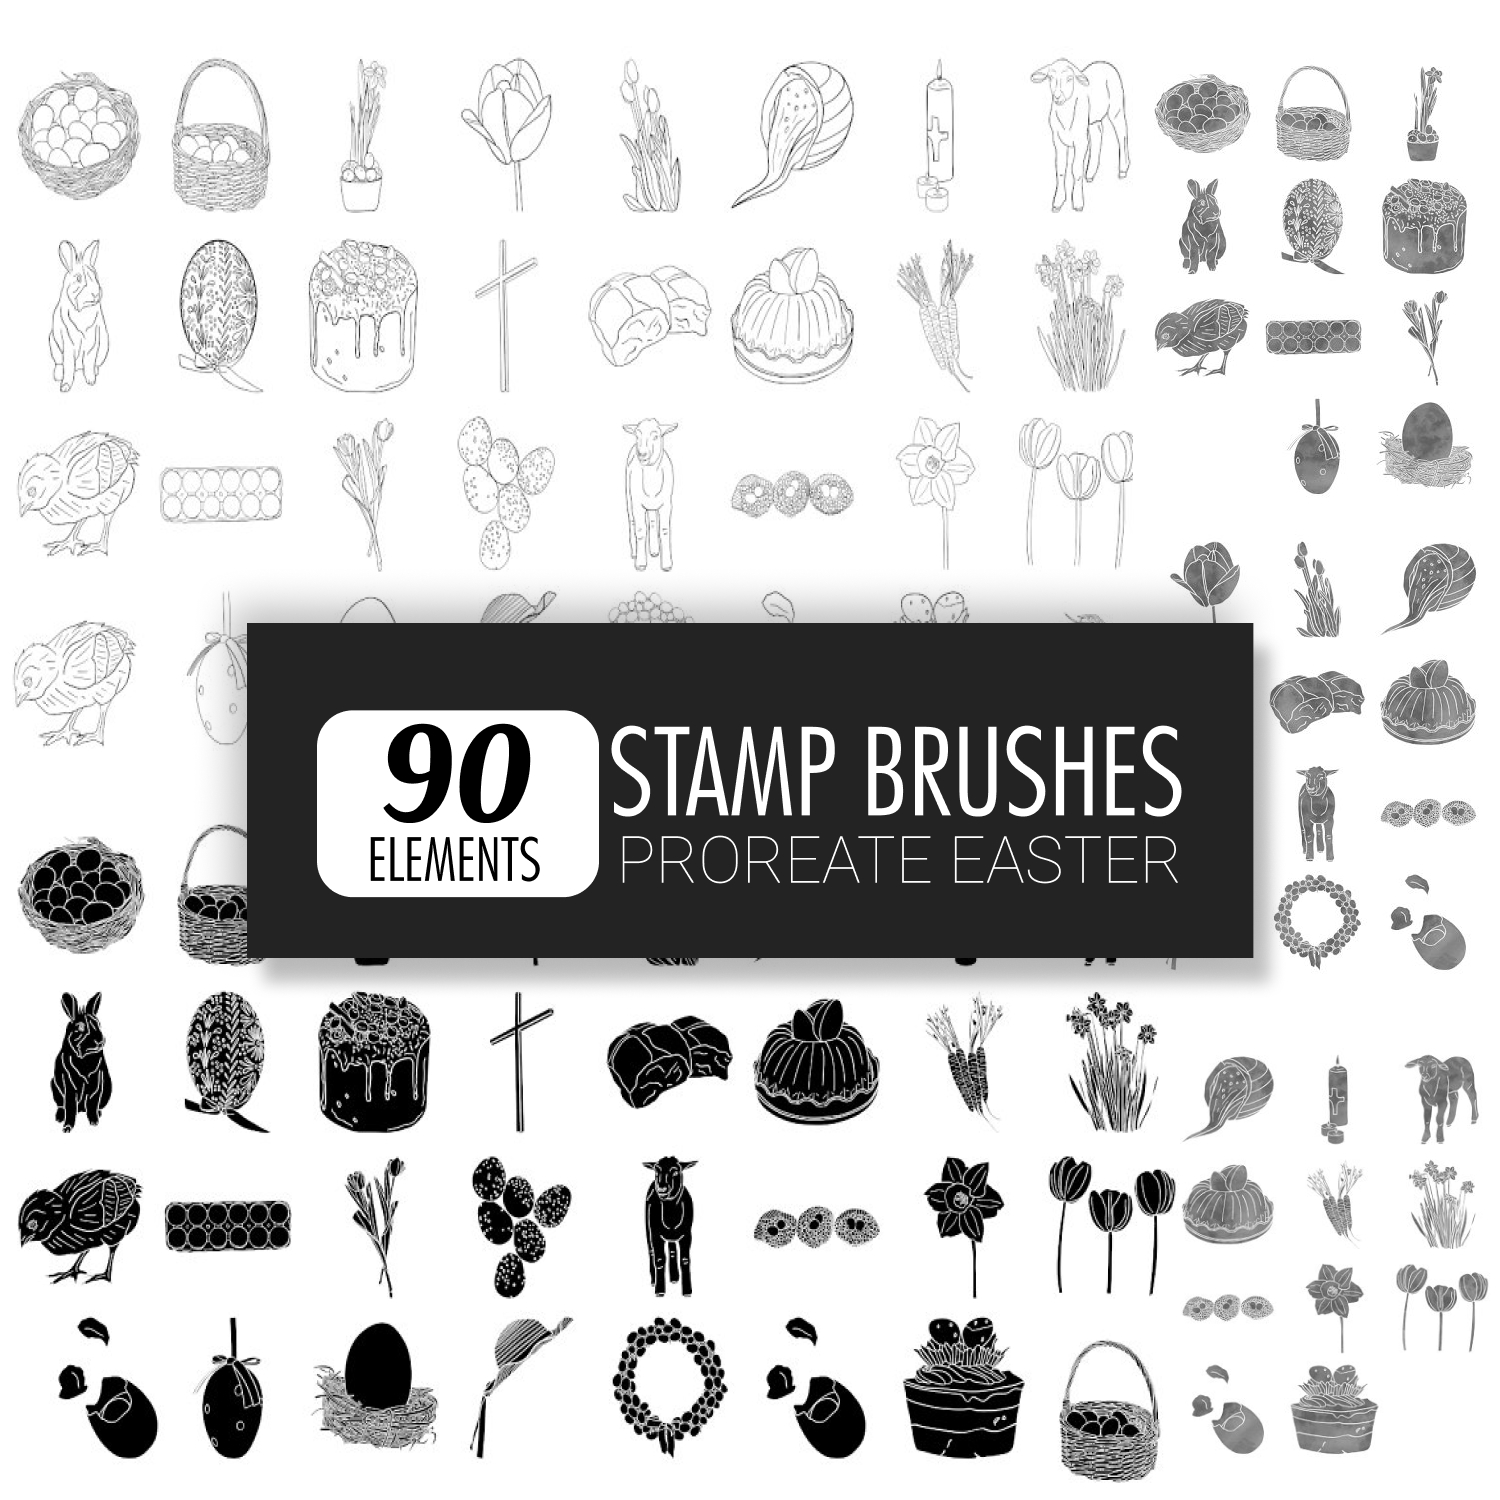 Procreate Easter Stamp Brushes.